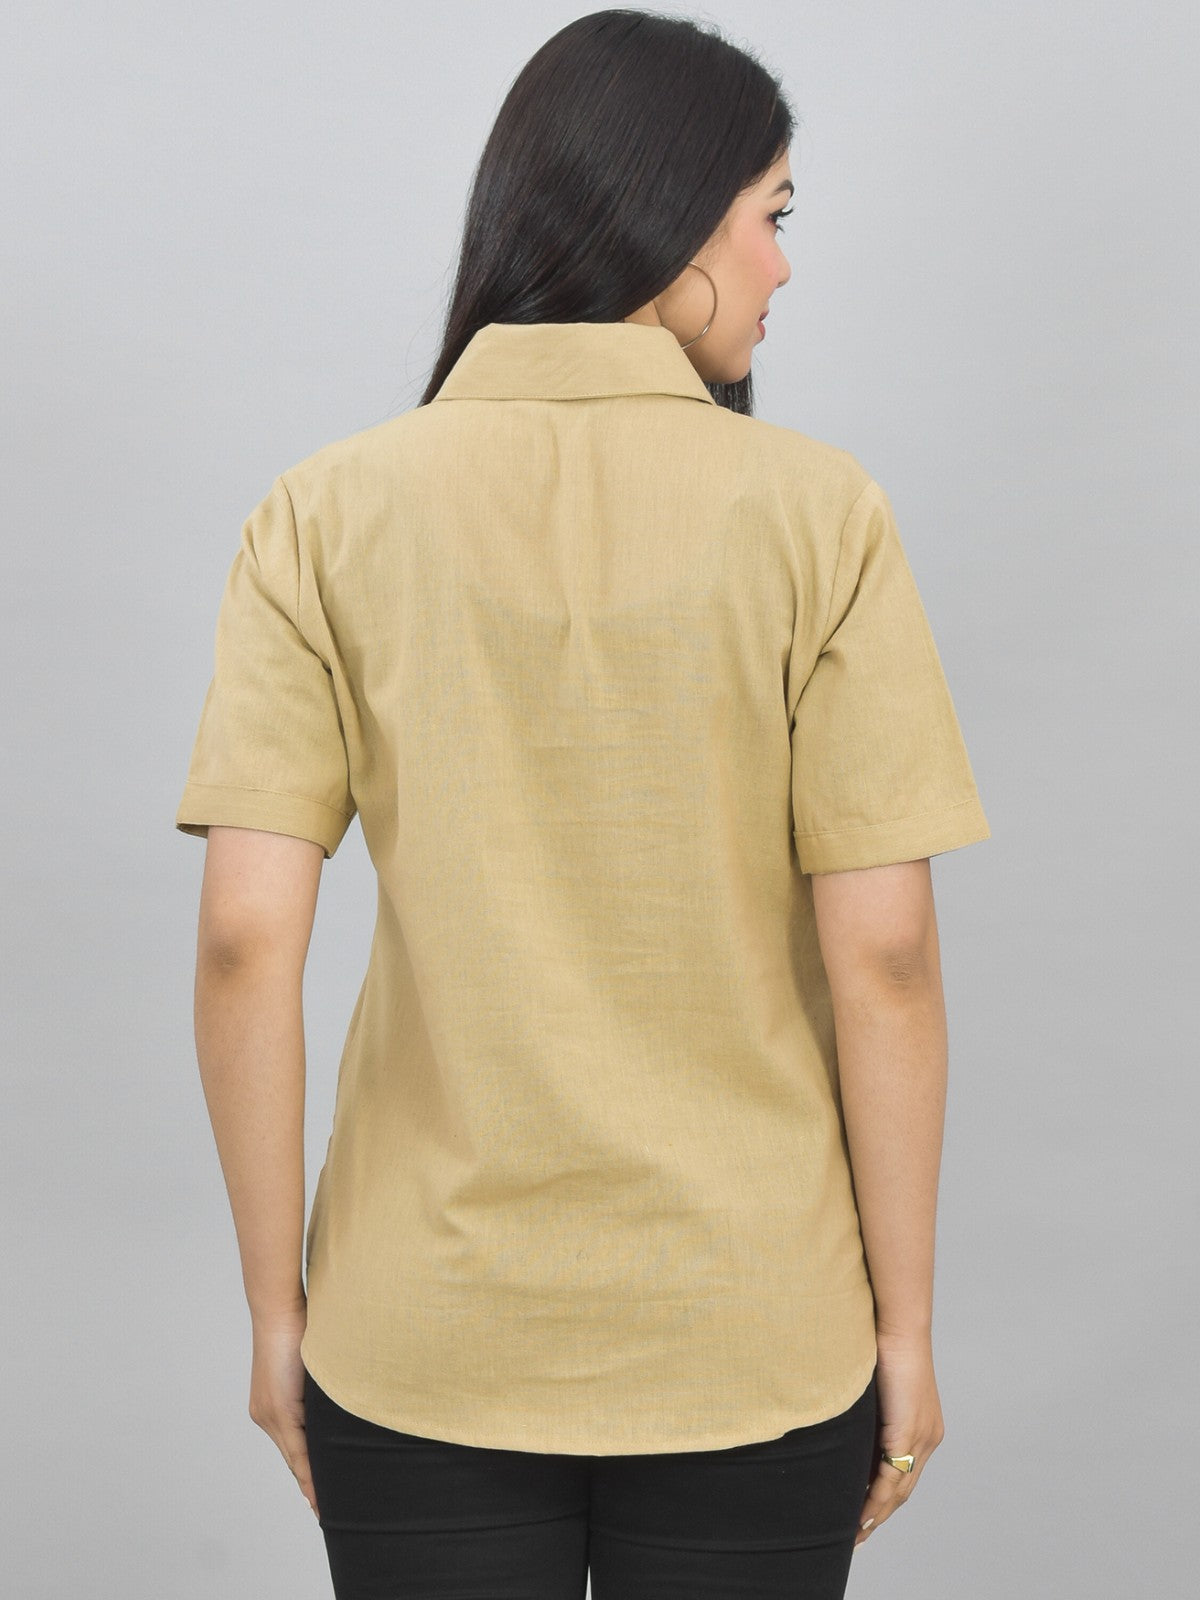 Pack Of 2 Womens Solid Beige And Olive Green Half Sleeve Cotton Shirts Combo